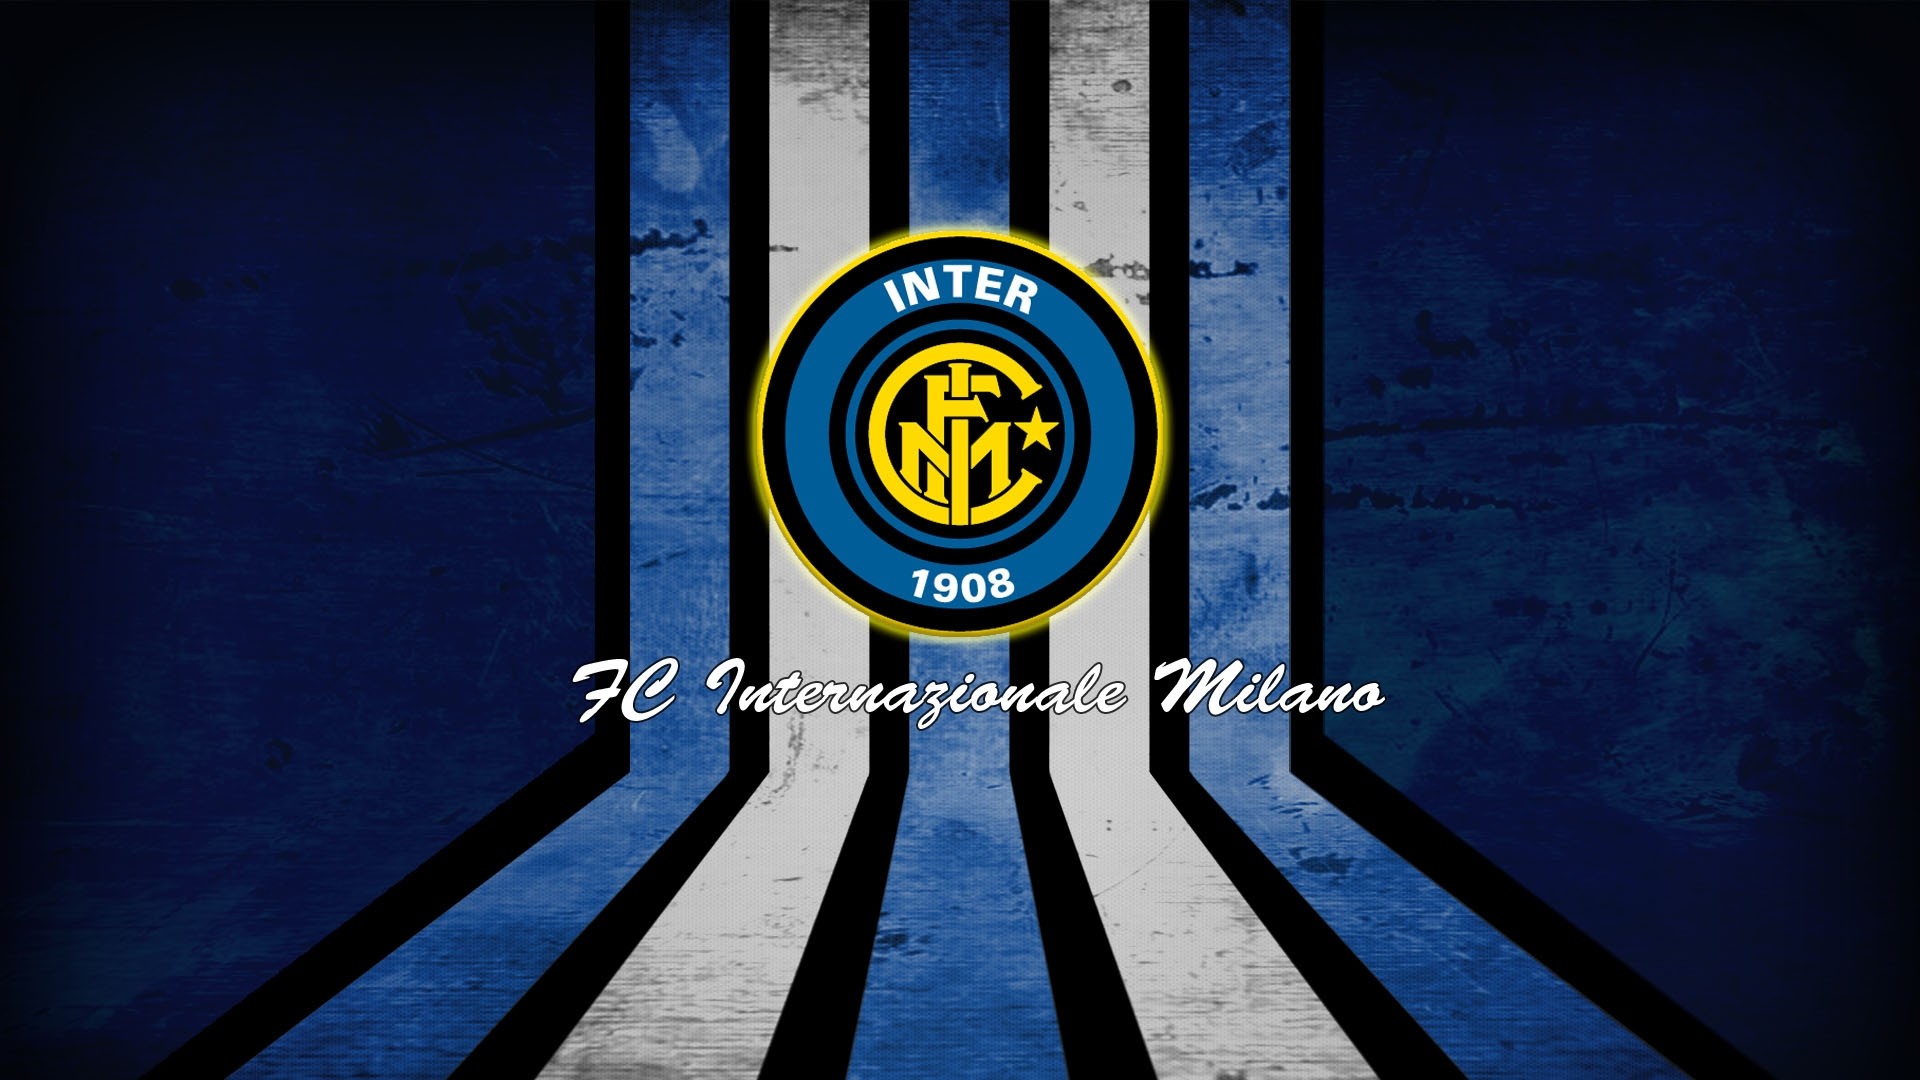 Inter Milan Wallpaper Widescreen Is High Definition You Can